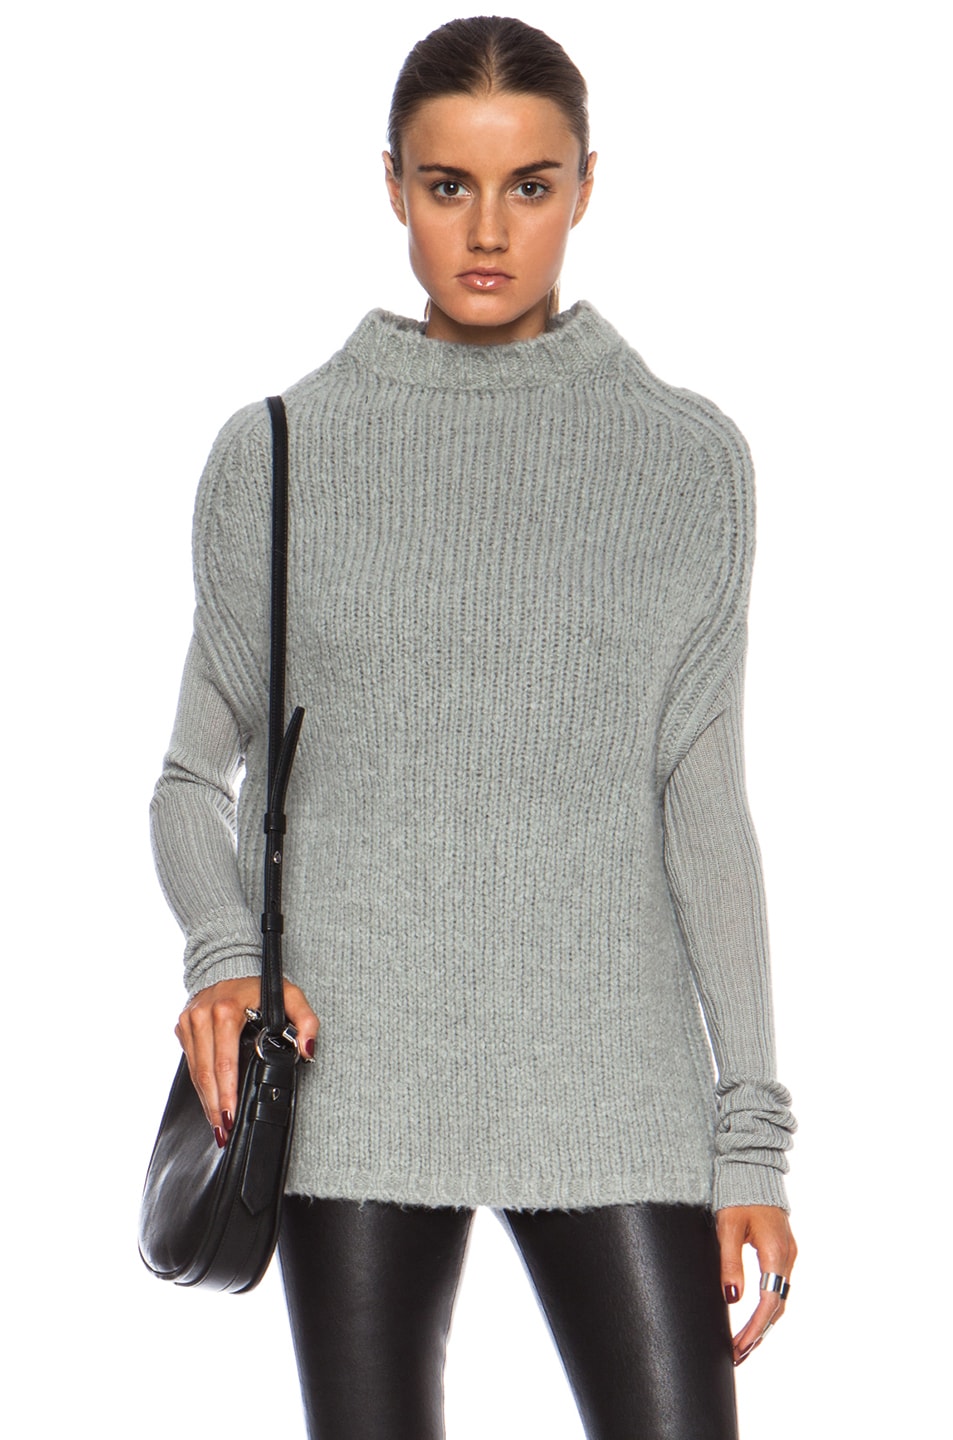 Rick Owens Crater Knit Cashmere-Blend Sweater in Tear | FWRD